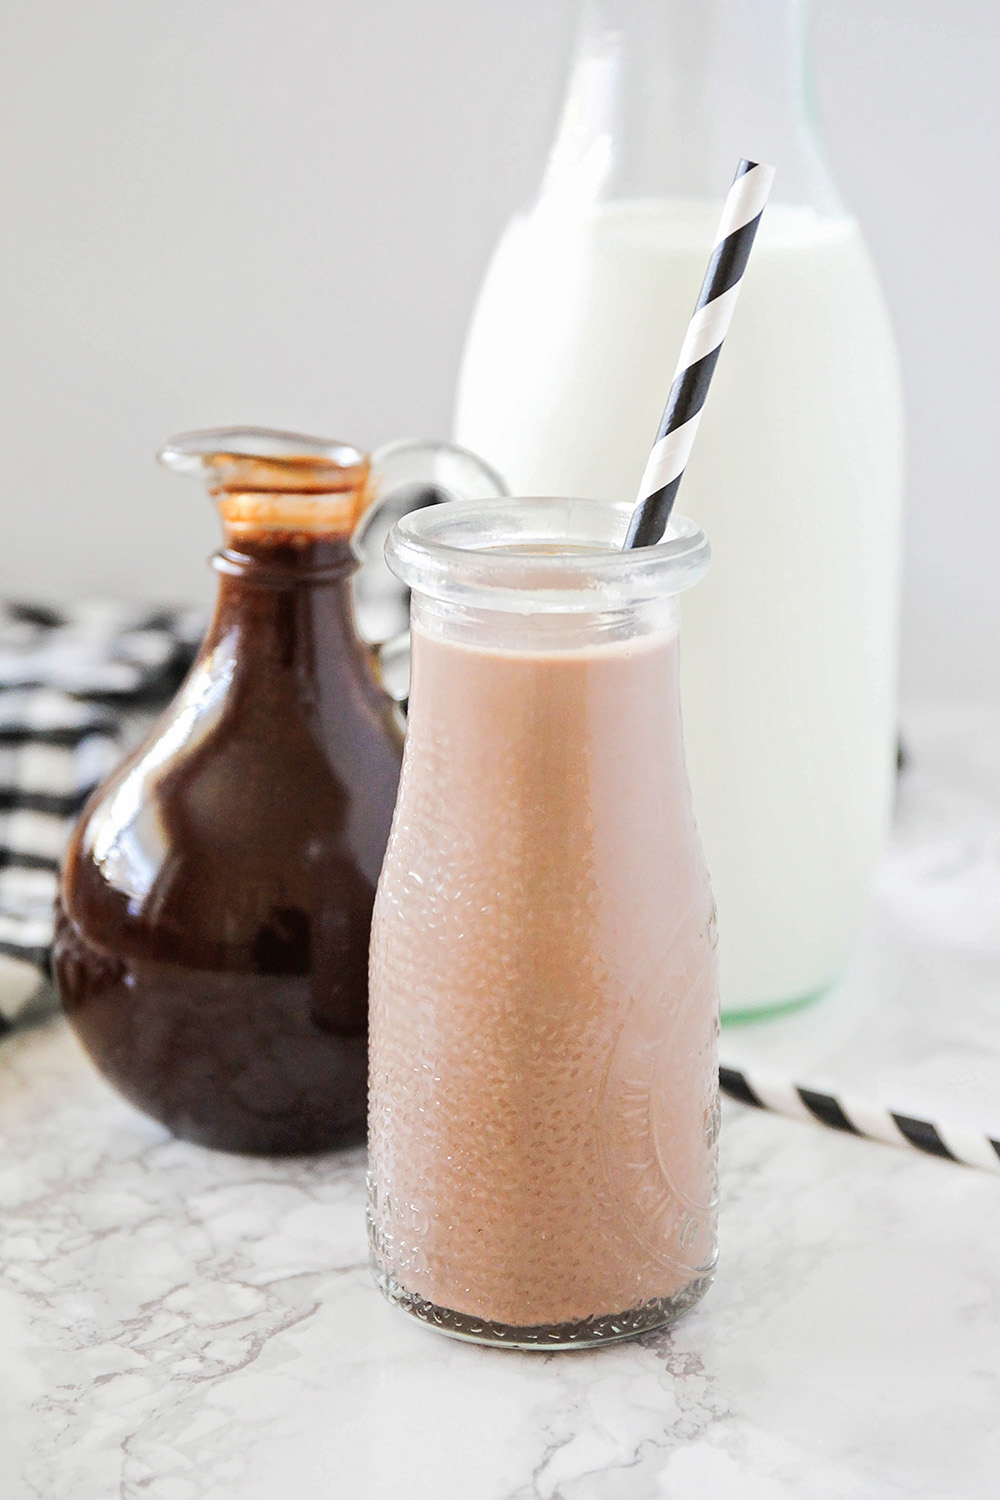 This homemade chocolate syrup is way better than store-bought, and perfect for everything from making chocolate milk to drizzling on waffles!